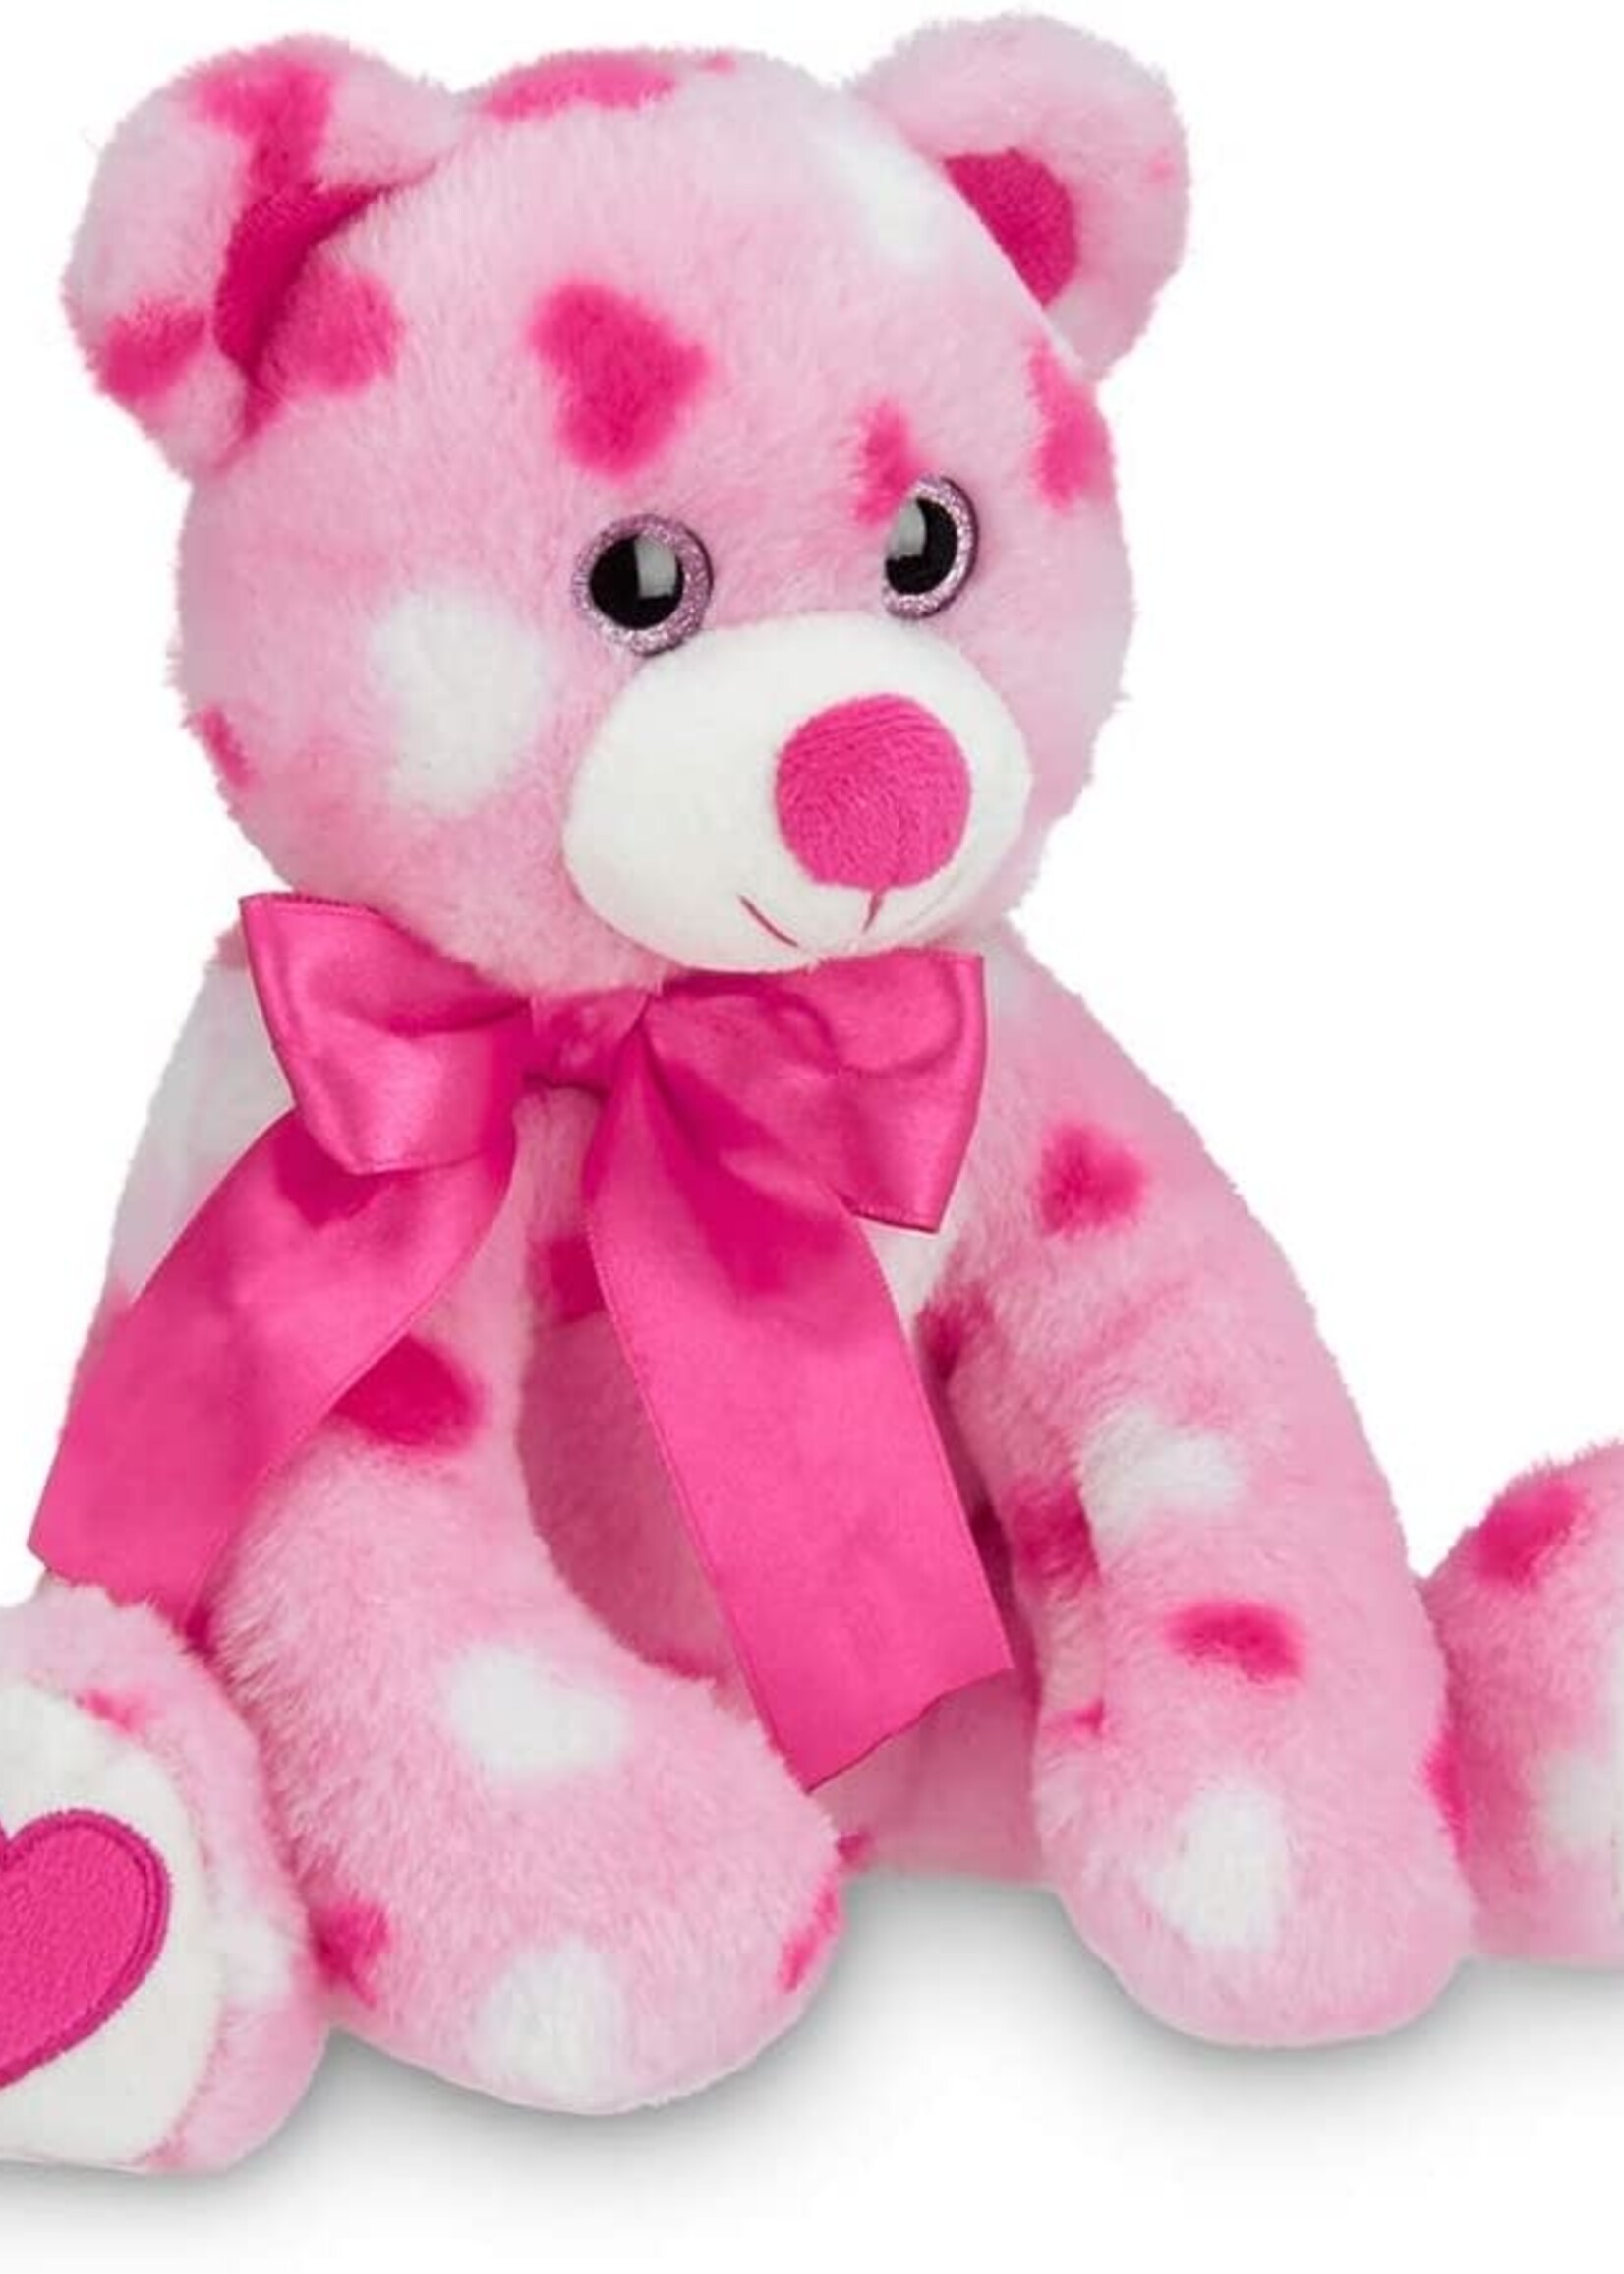 Pink Plush Stuffed Animal Teddy Bear with Hearts, 8.5 inches